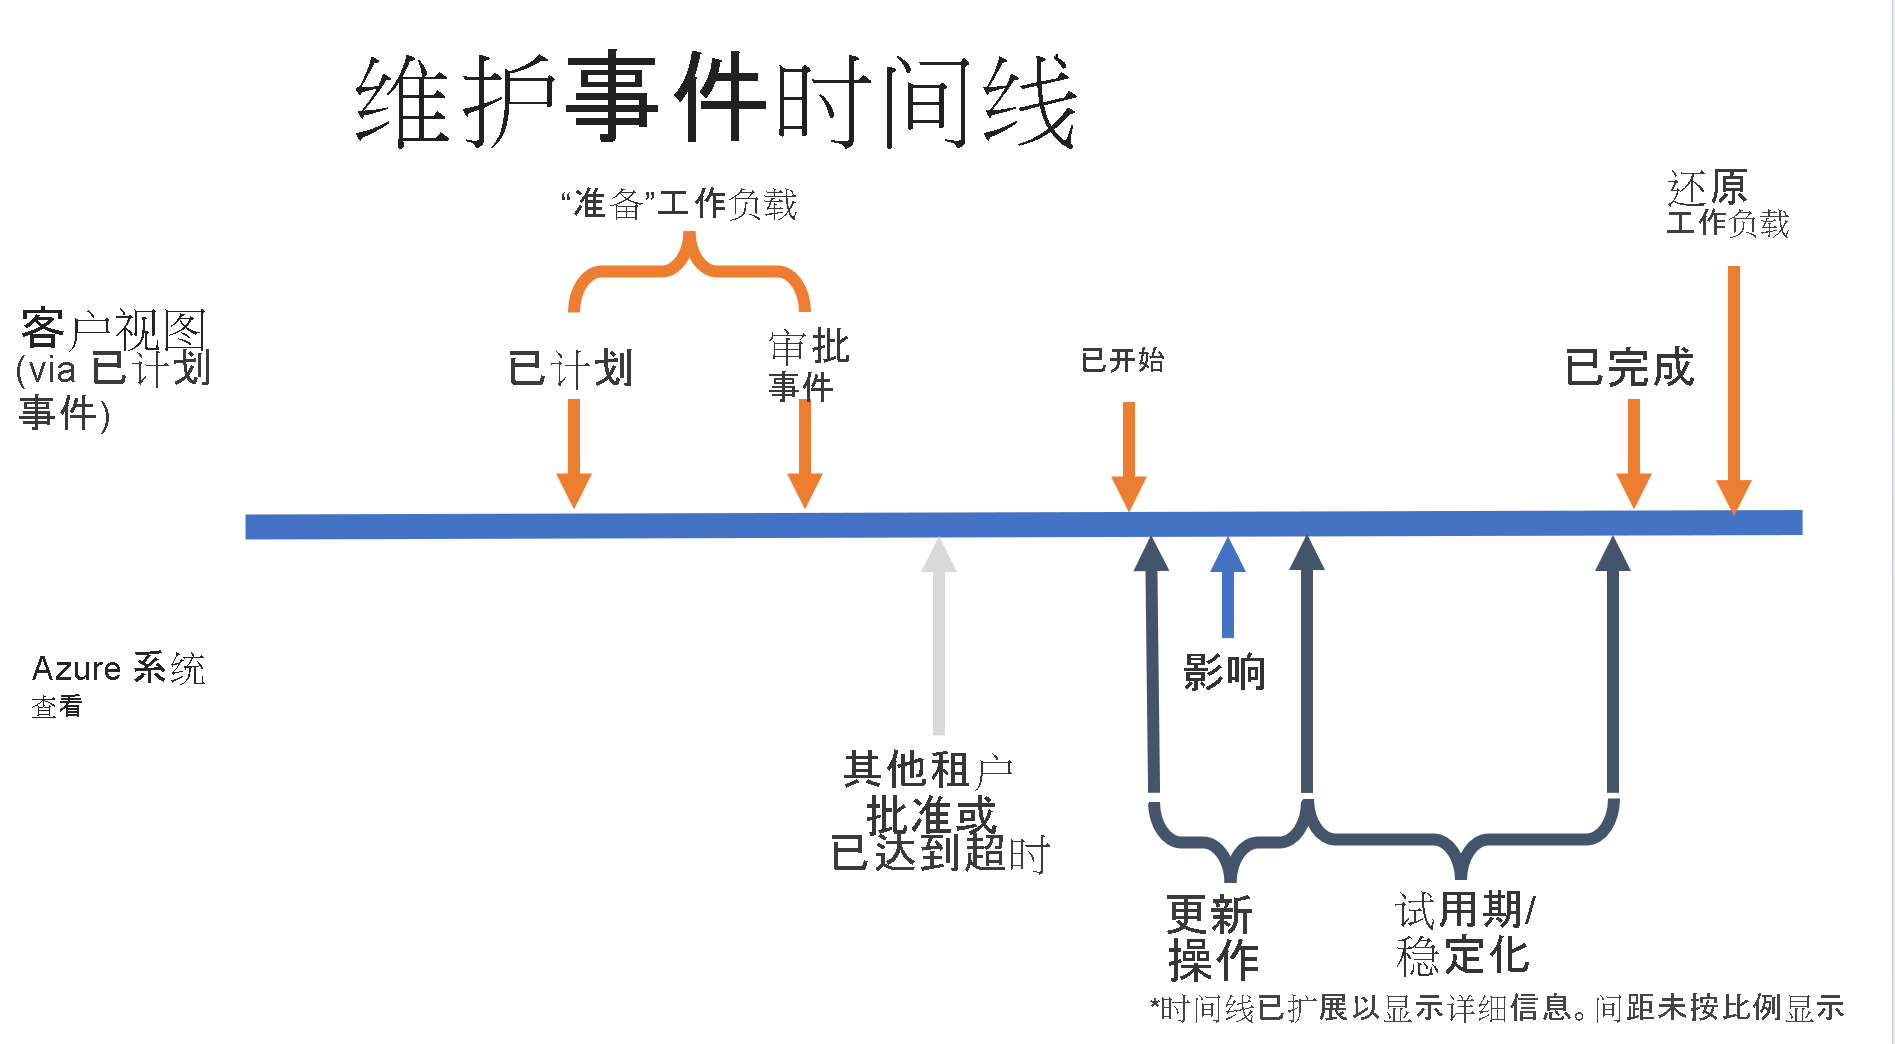 Diagram of a timeline showing the flow of a scheduled event.